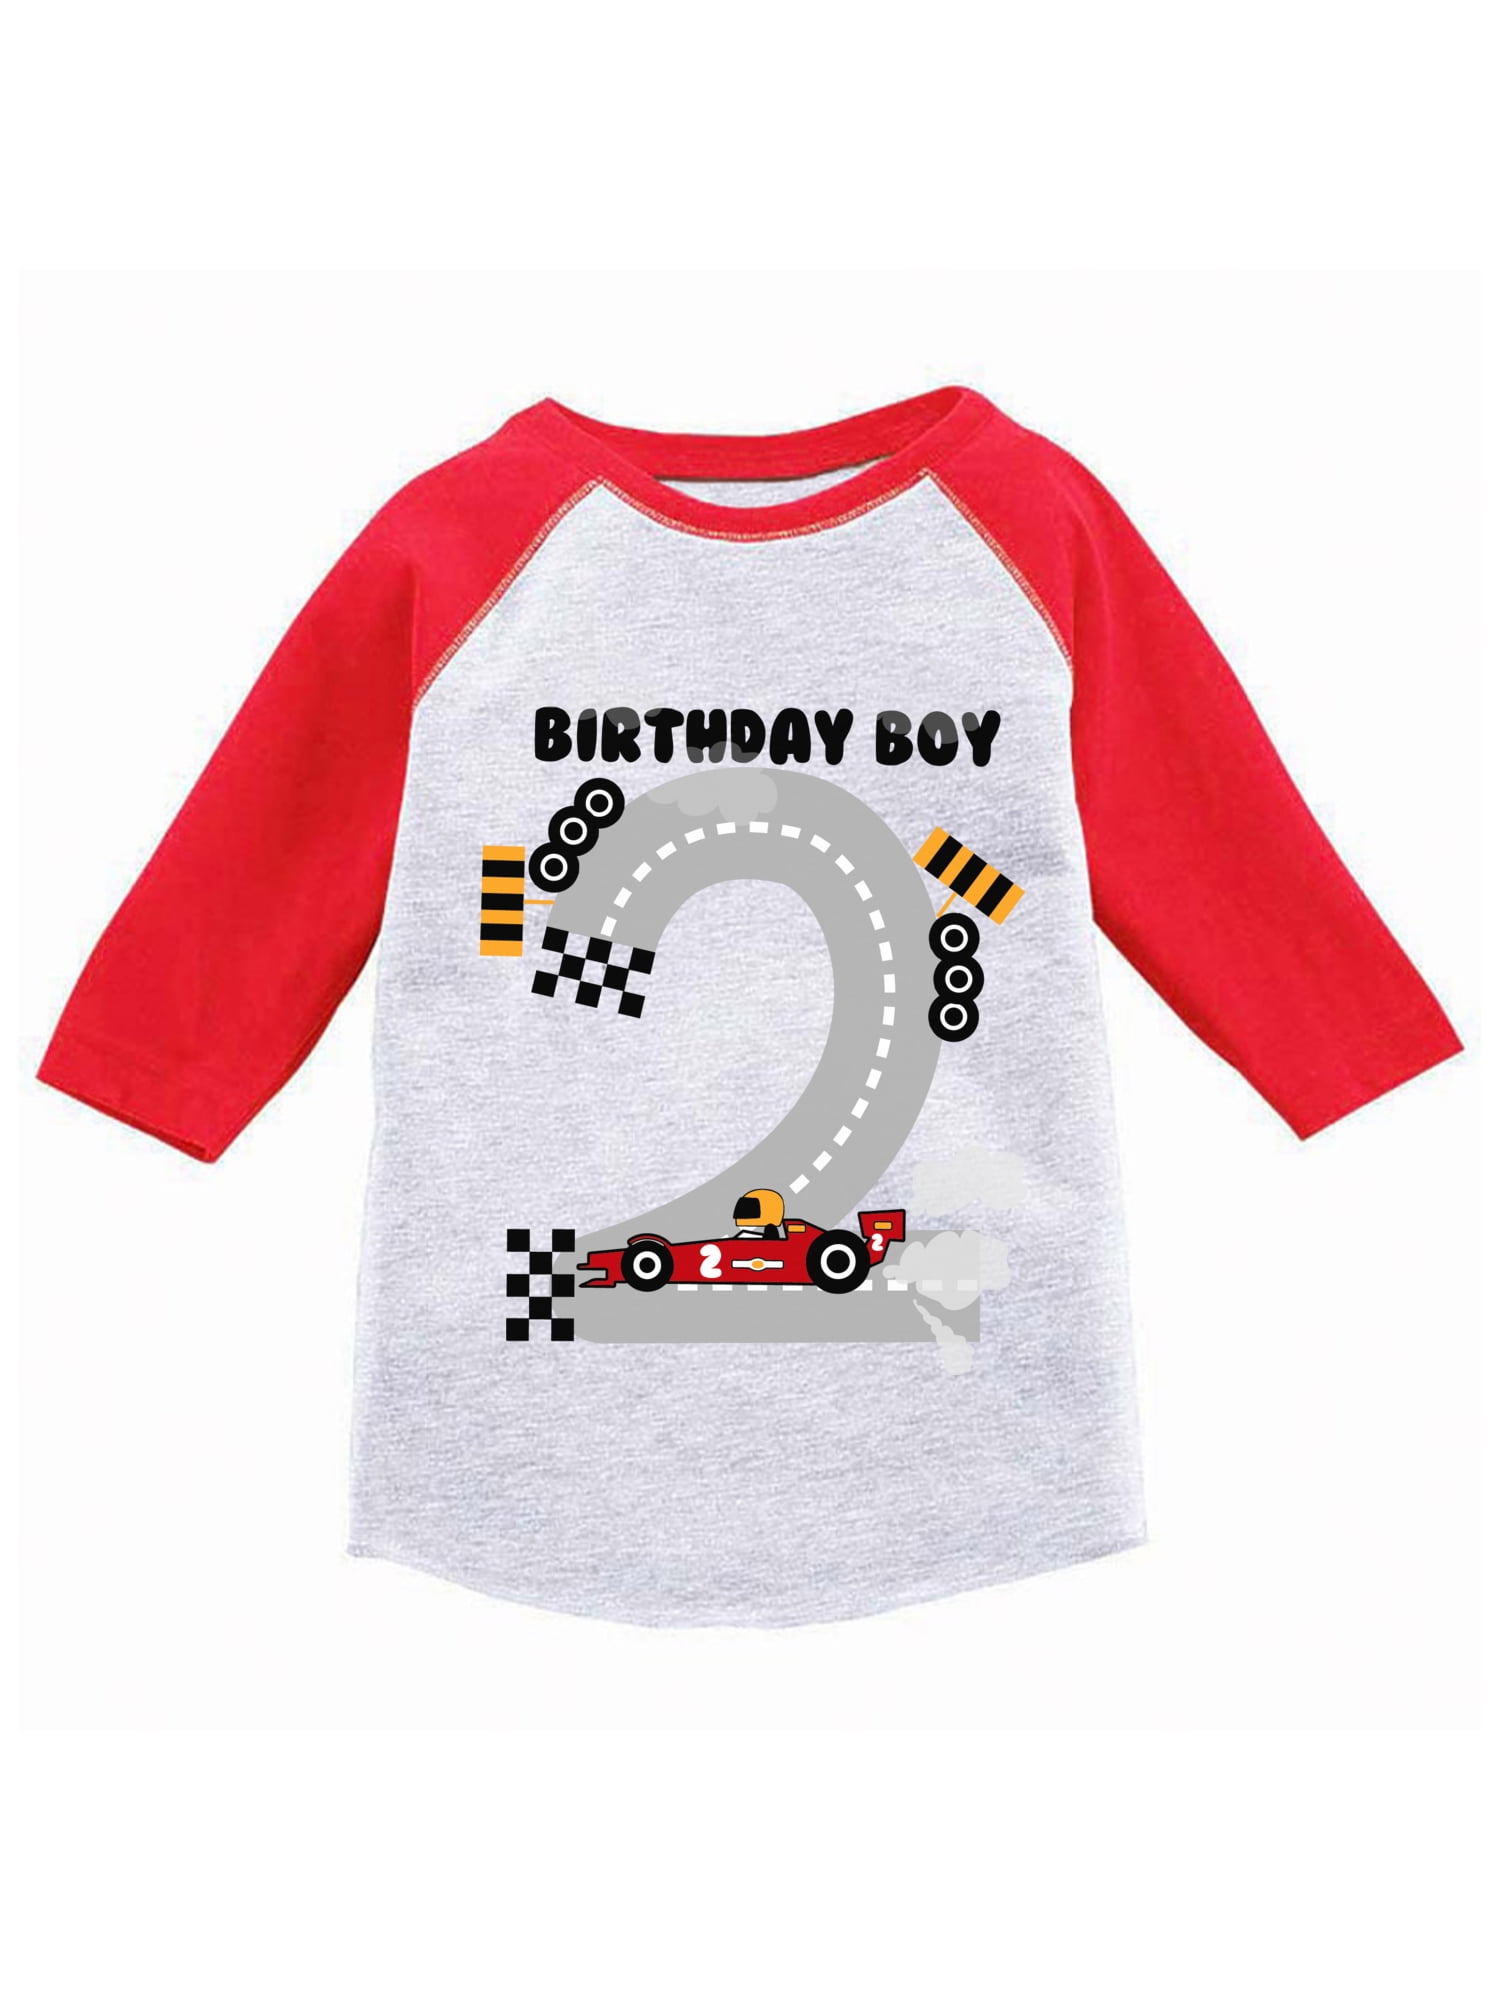 ~NEW~ BIRTHDAY Boys Graphic Shirts 1st 2nd 3rd 4th 5th Years Gift Sports Cars 